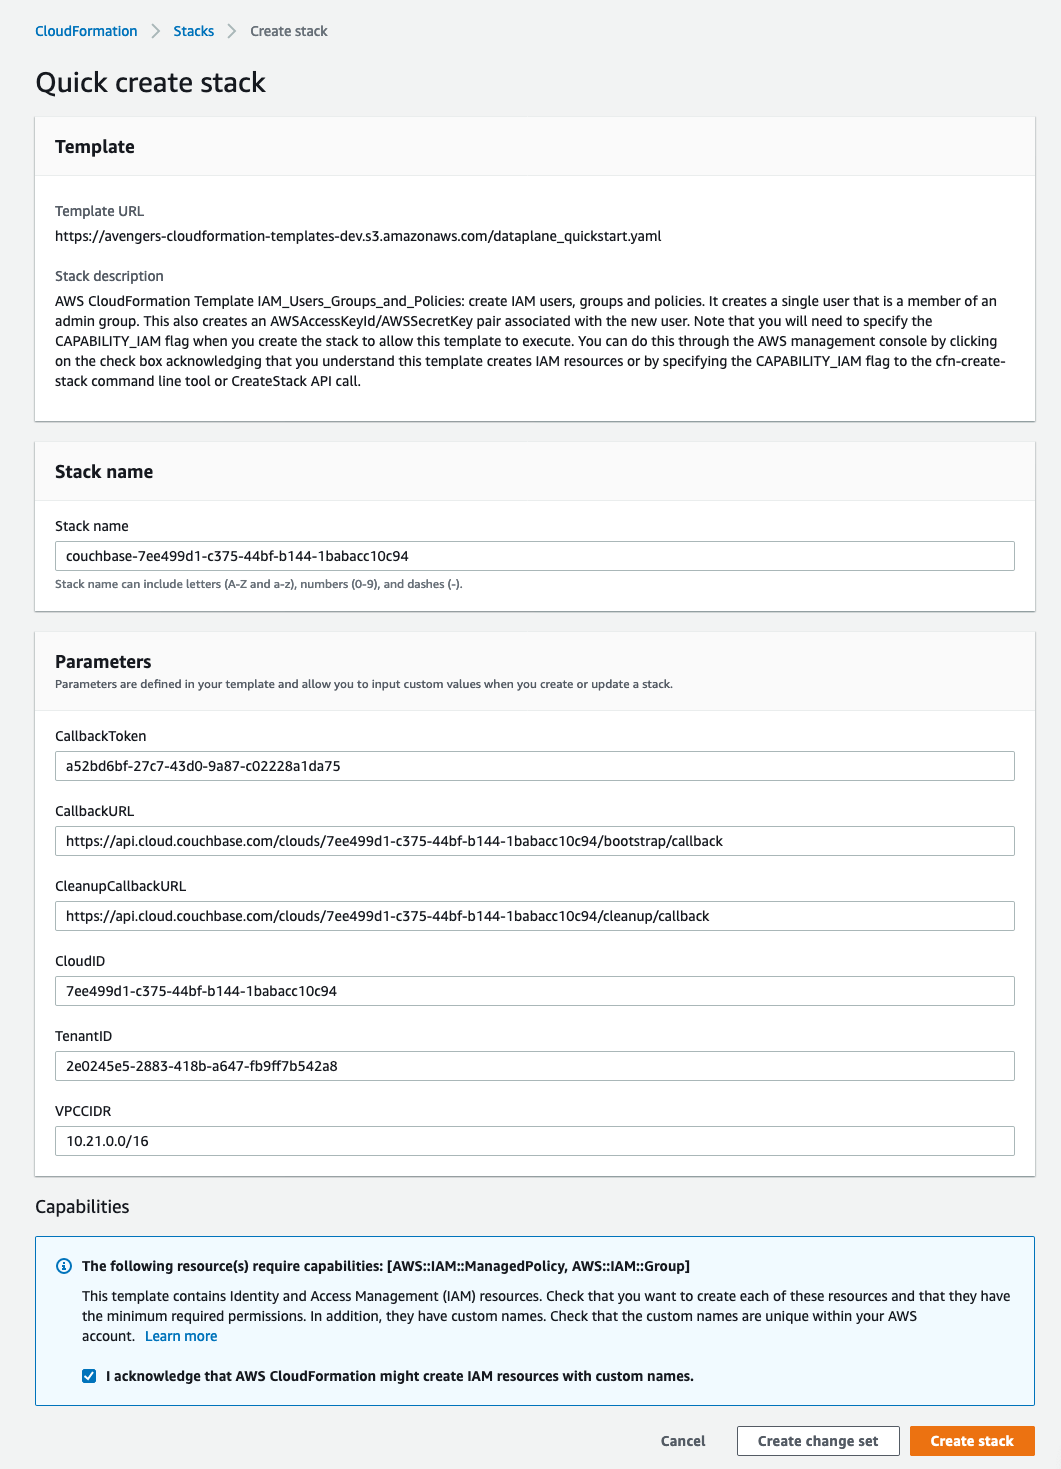 AWS 'Quick create stack' template showing several pre-filled fields, a required IAM acknowledgment checkbox, and buttons at the bottom to 'Create change set' or 'Create stack'.